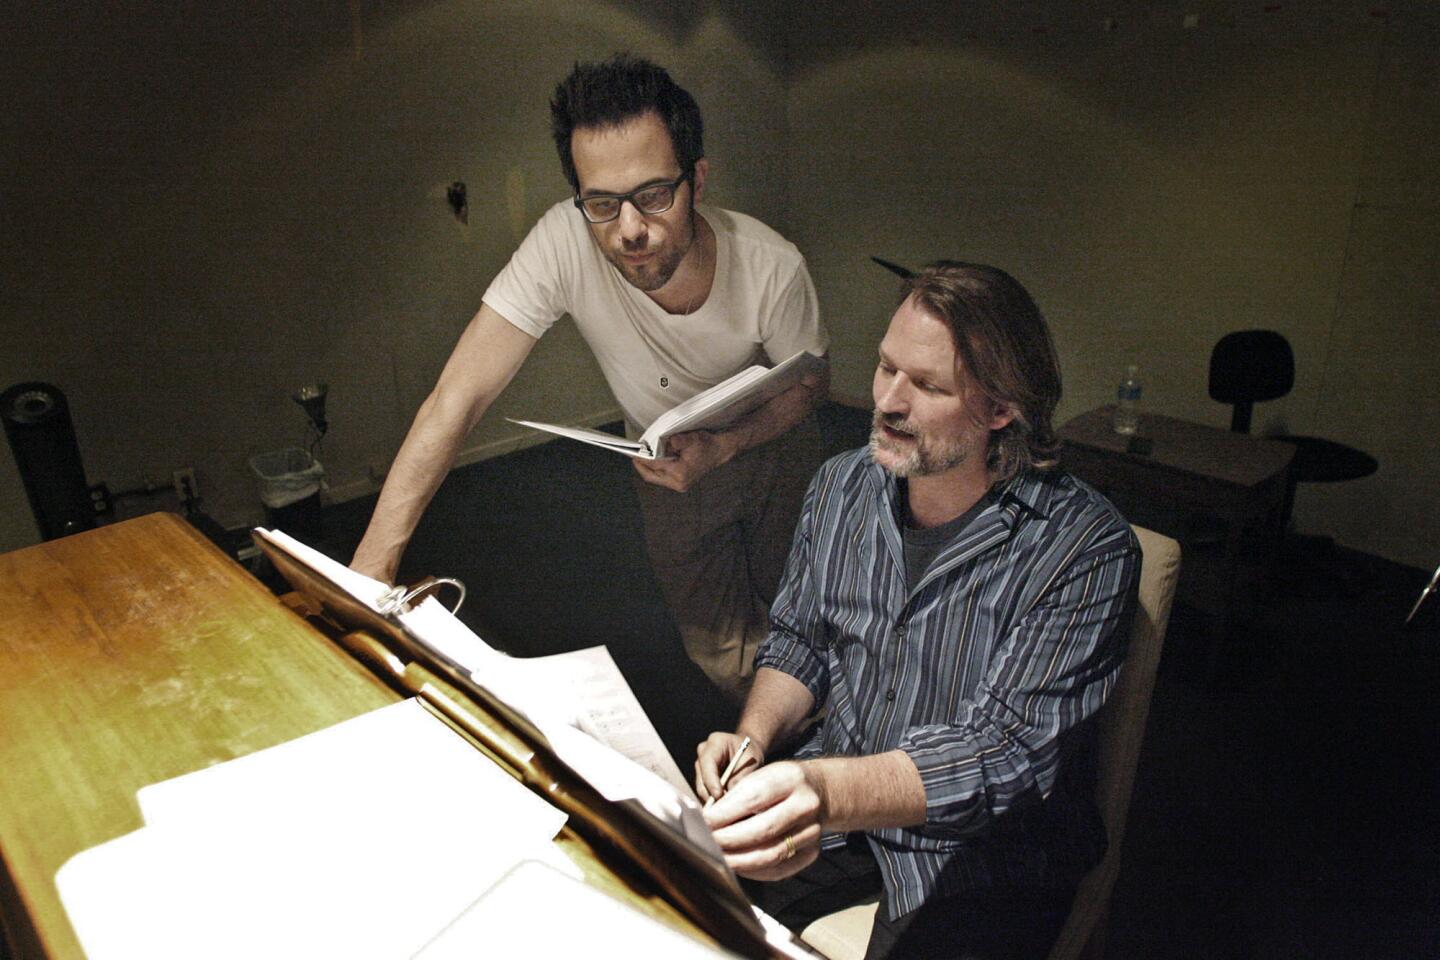 Sleepless in Seattle's composer Ben Toth, left, goes over some notes with musical director David O during rehearsal, which took place at the Pasadena Playhouse on Friday, May 10, 2013. Sleepless in Seattle will begin their performances from May 24th thru June 23rd.